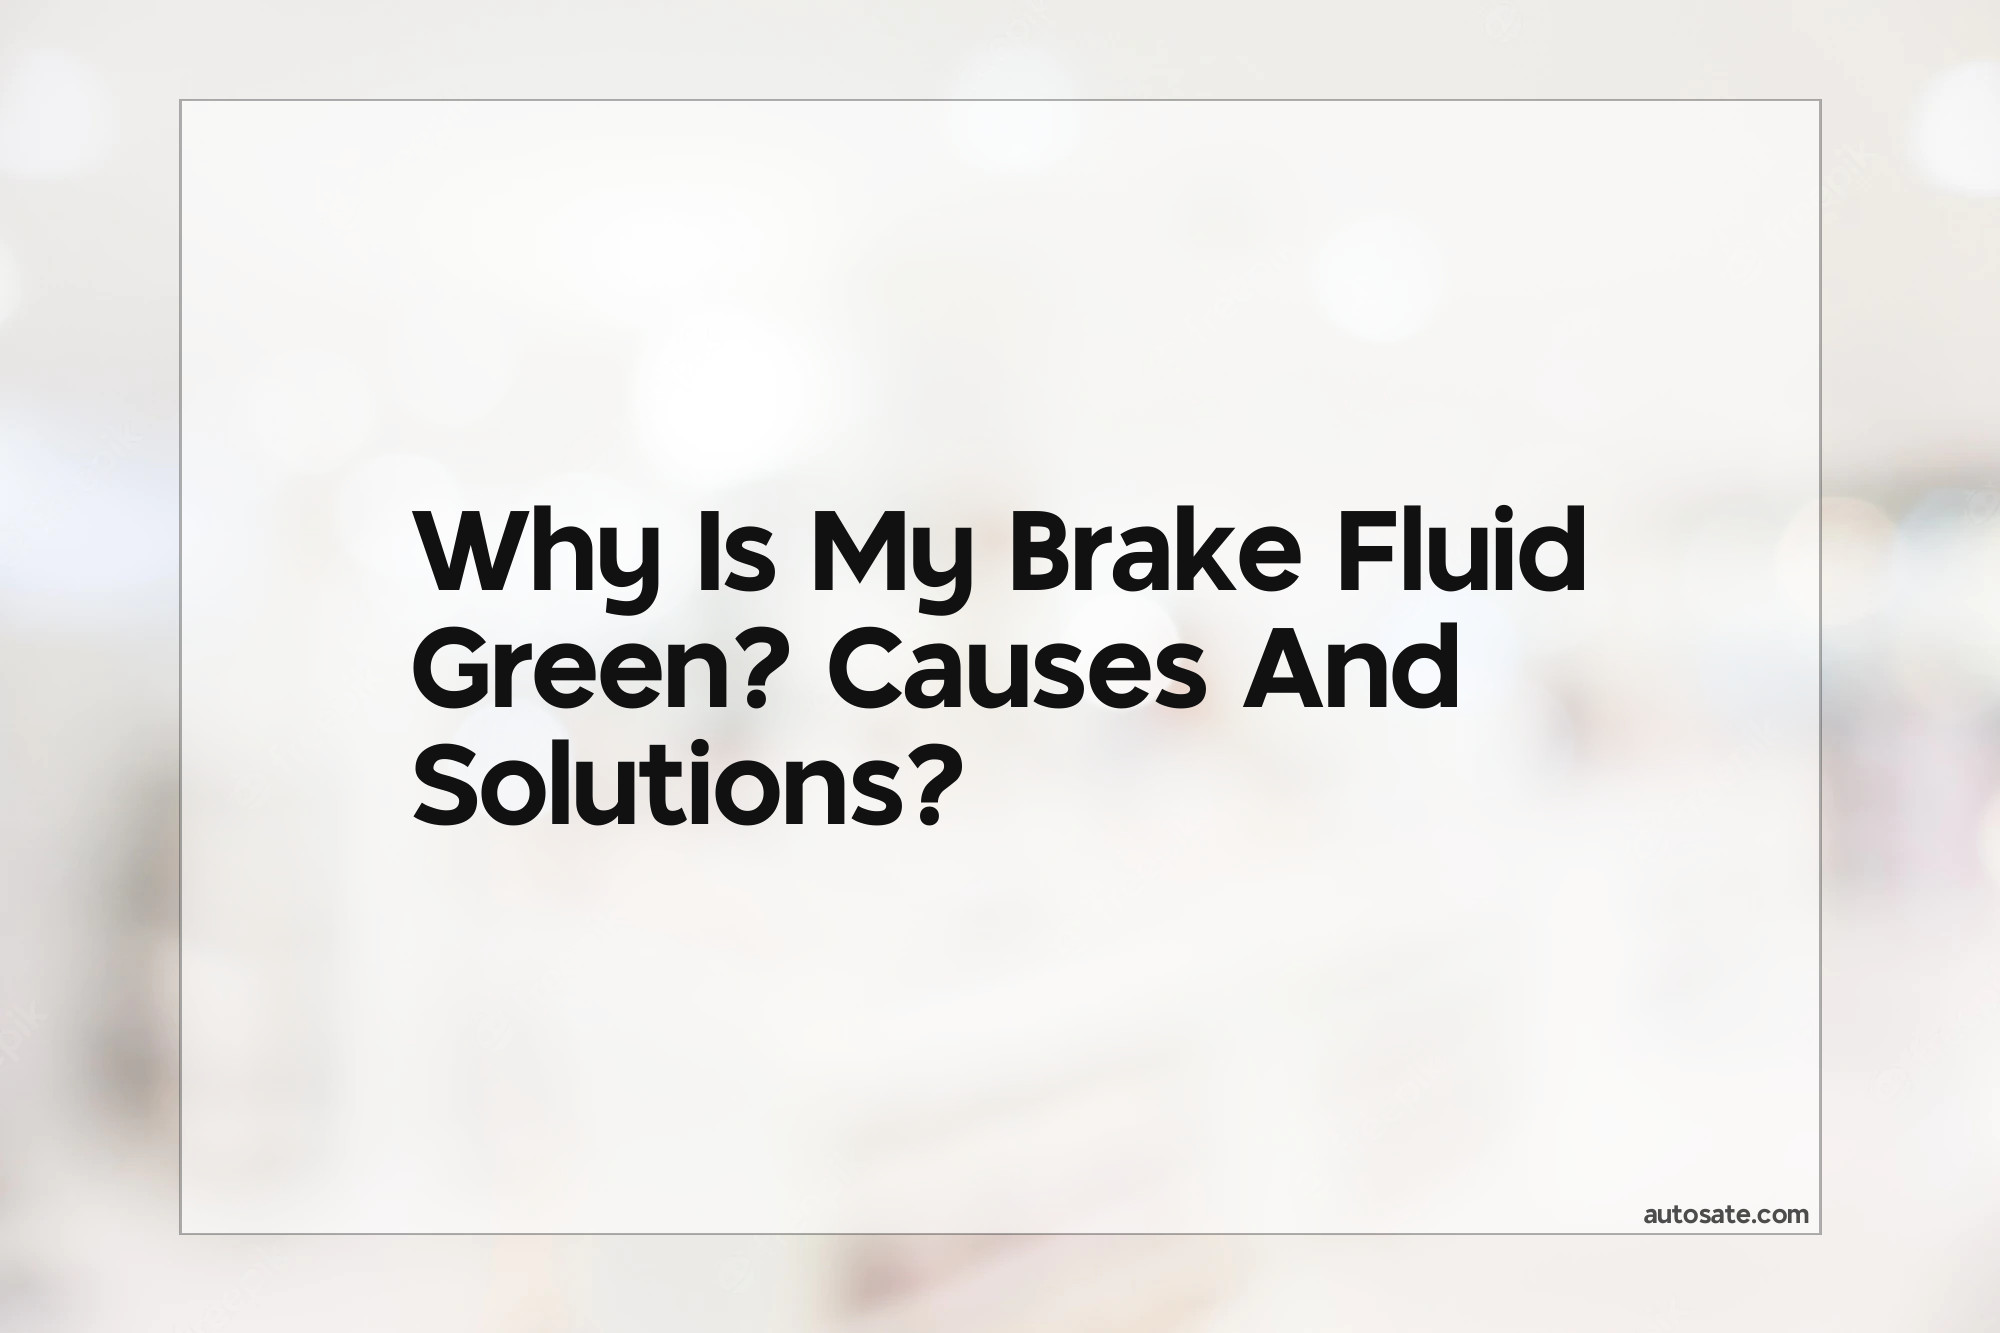 Why Is My Brake Fluid Green? Causes And Solutions